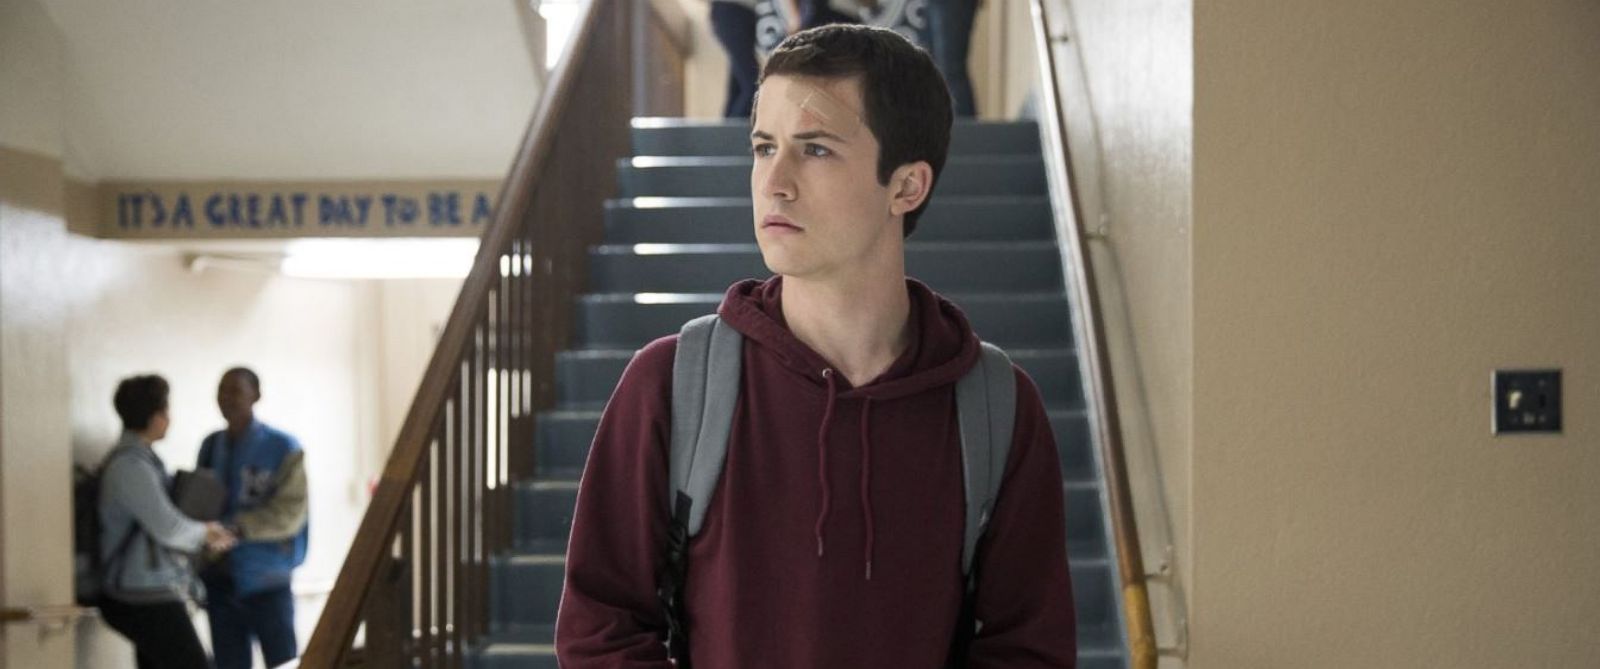 13 Reasons Why is a show all parents must watch  with their children